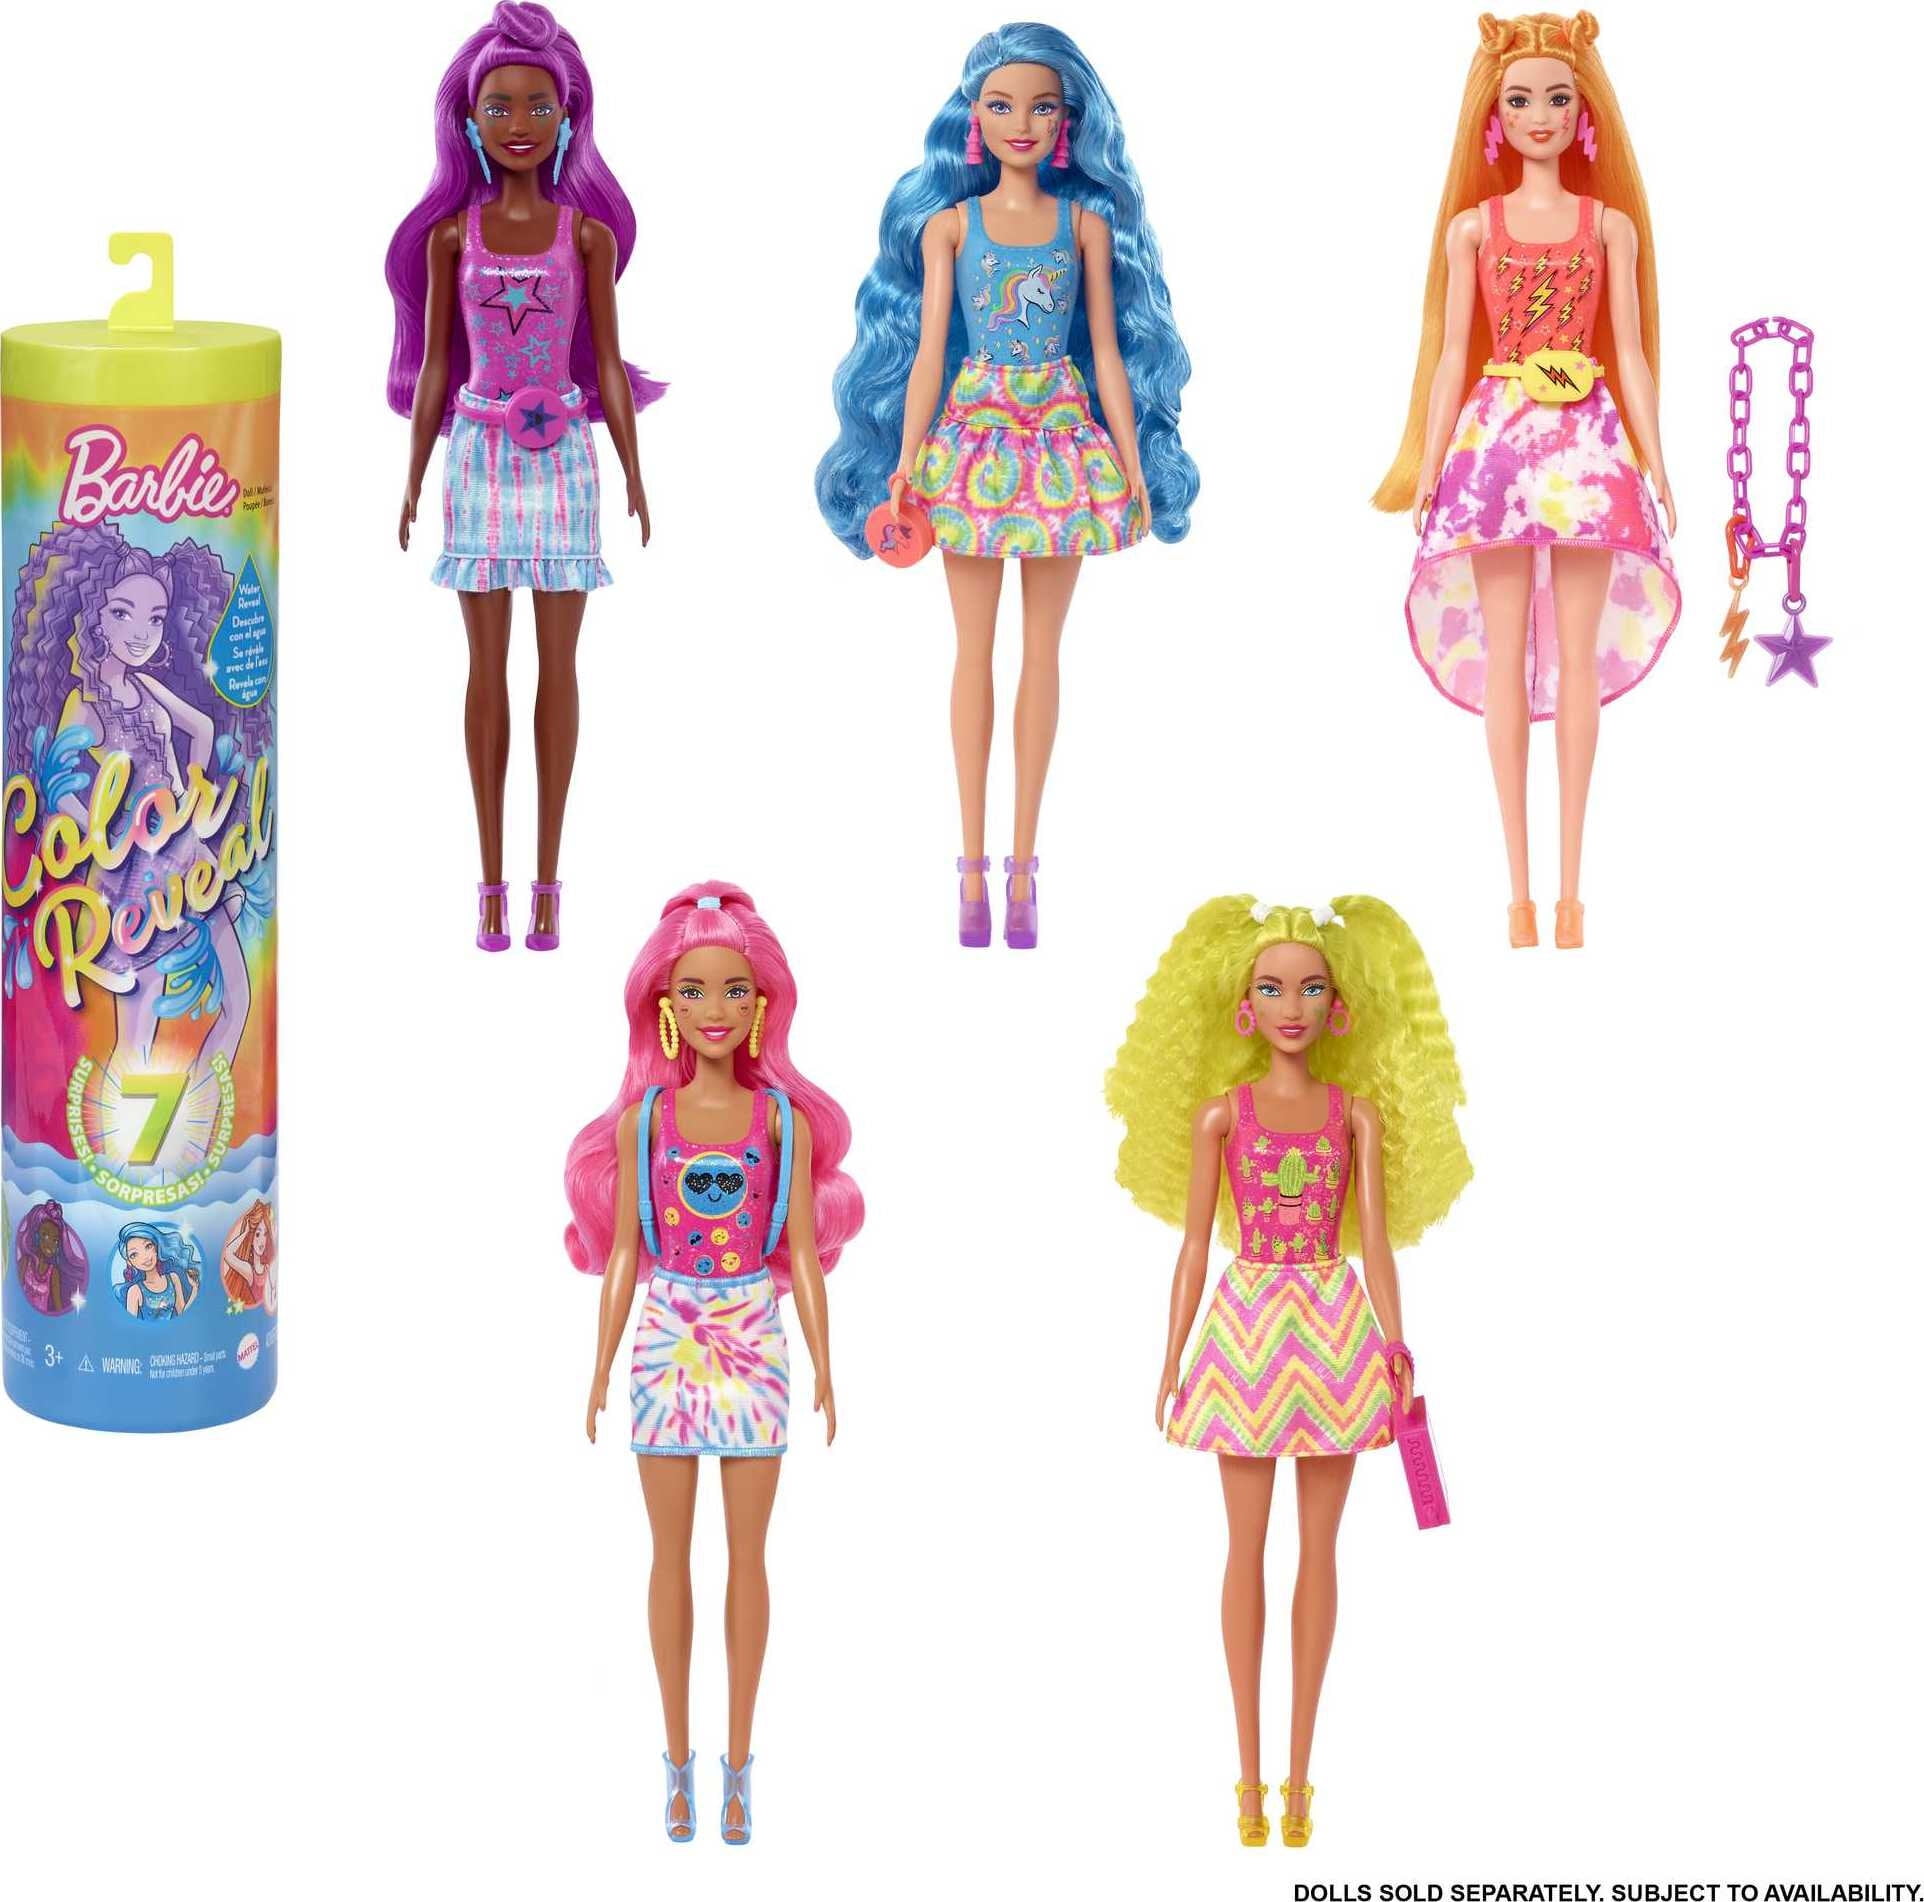 Barbie Doll Color Reveal Gift Set Tie Dye Fashion Maker With Barbie 